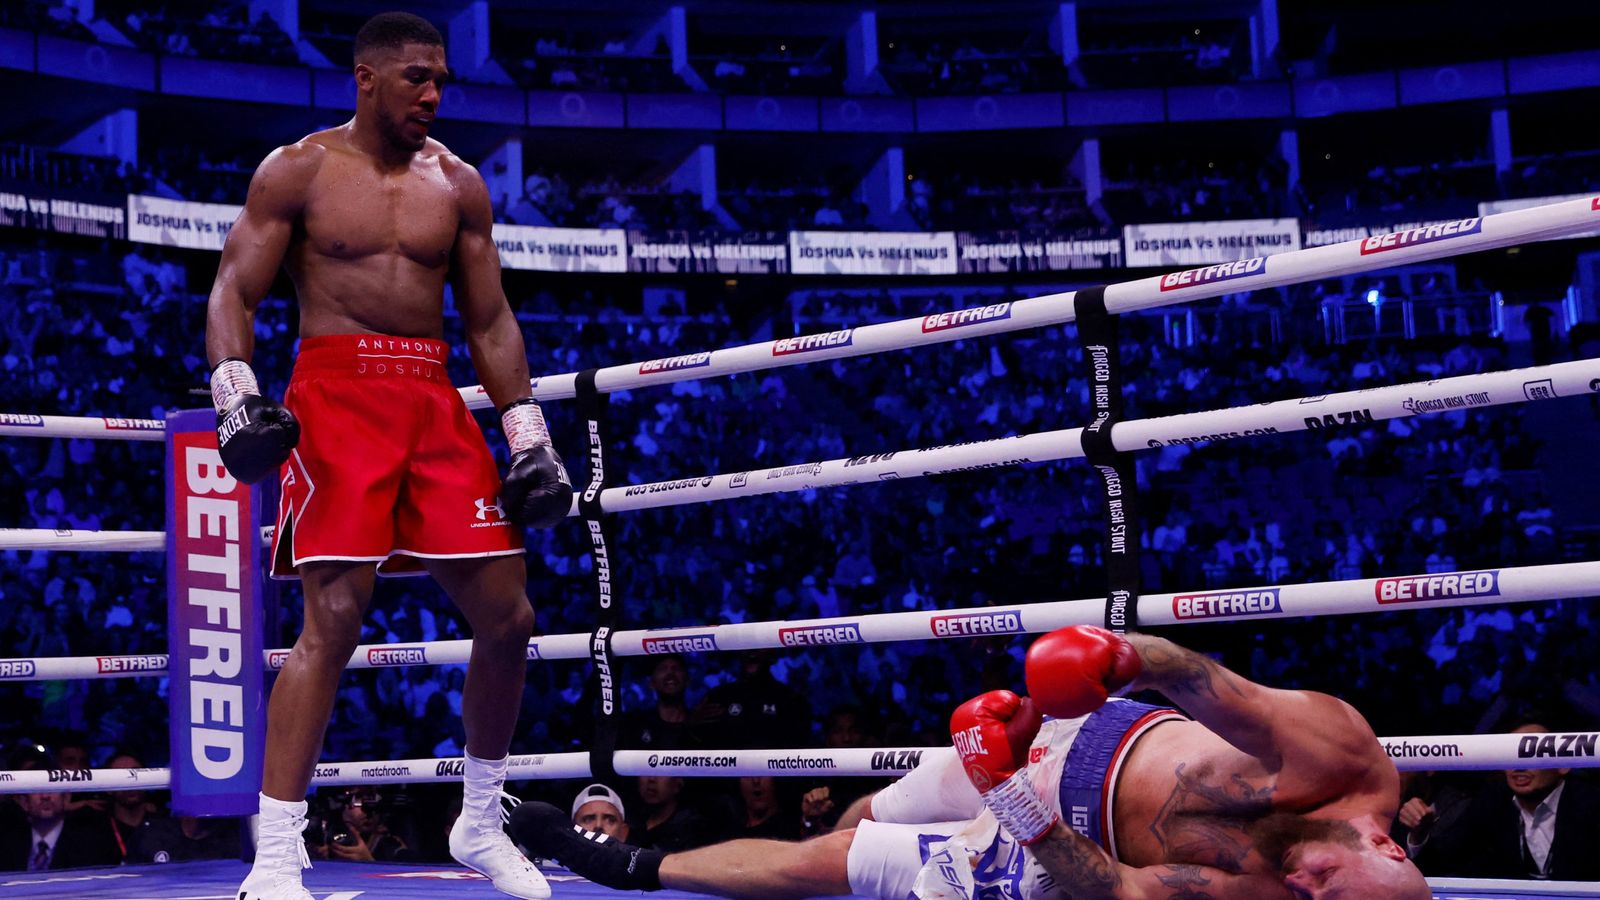 Anthony Joshua's most recent opponent failed drugs test before bout